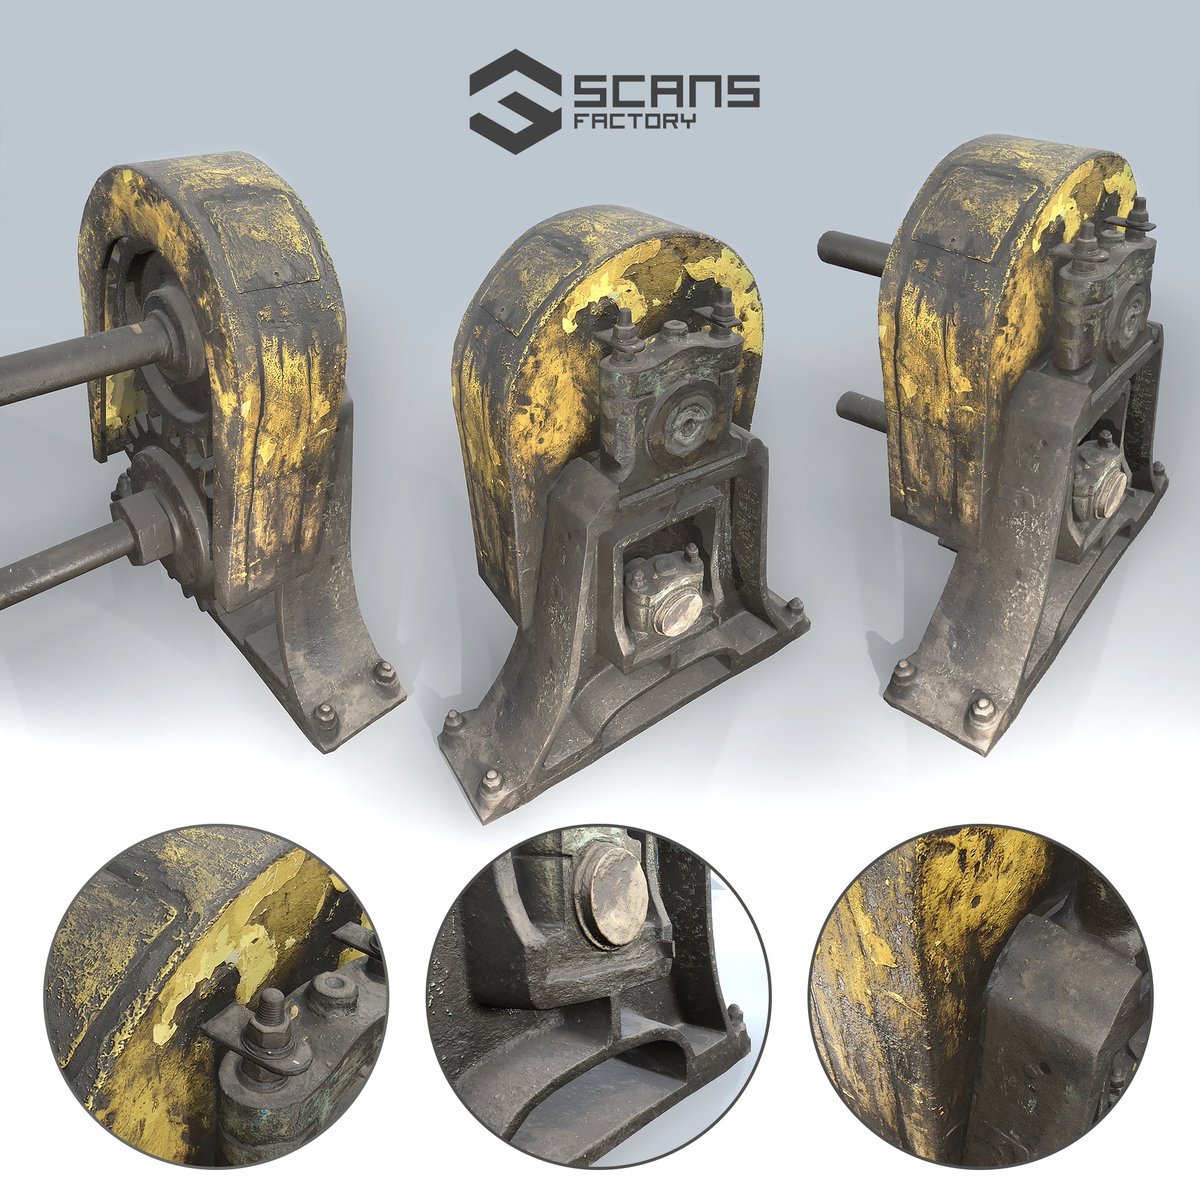 One small asset from our new scene. Apparently, Łukasz prepared more of them for you! 😀

#3dasset #ue5 #unreal5 #maya3d #scans #photogrammetry #newstuff #news #realitycapture